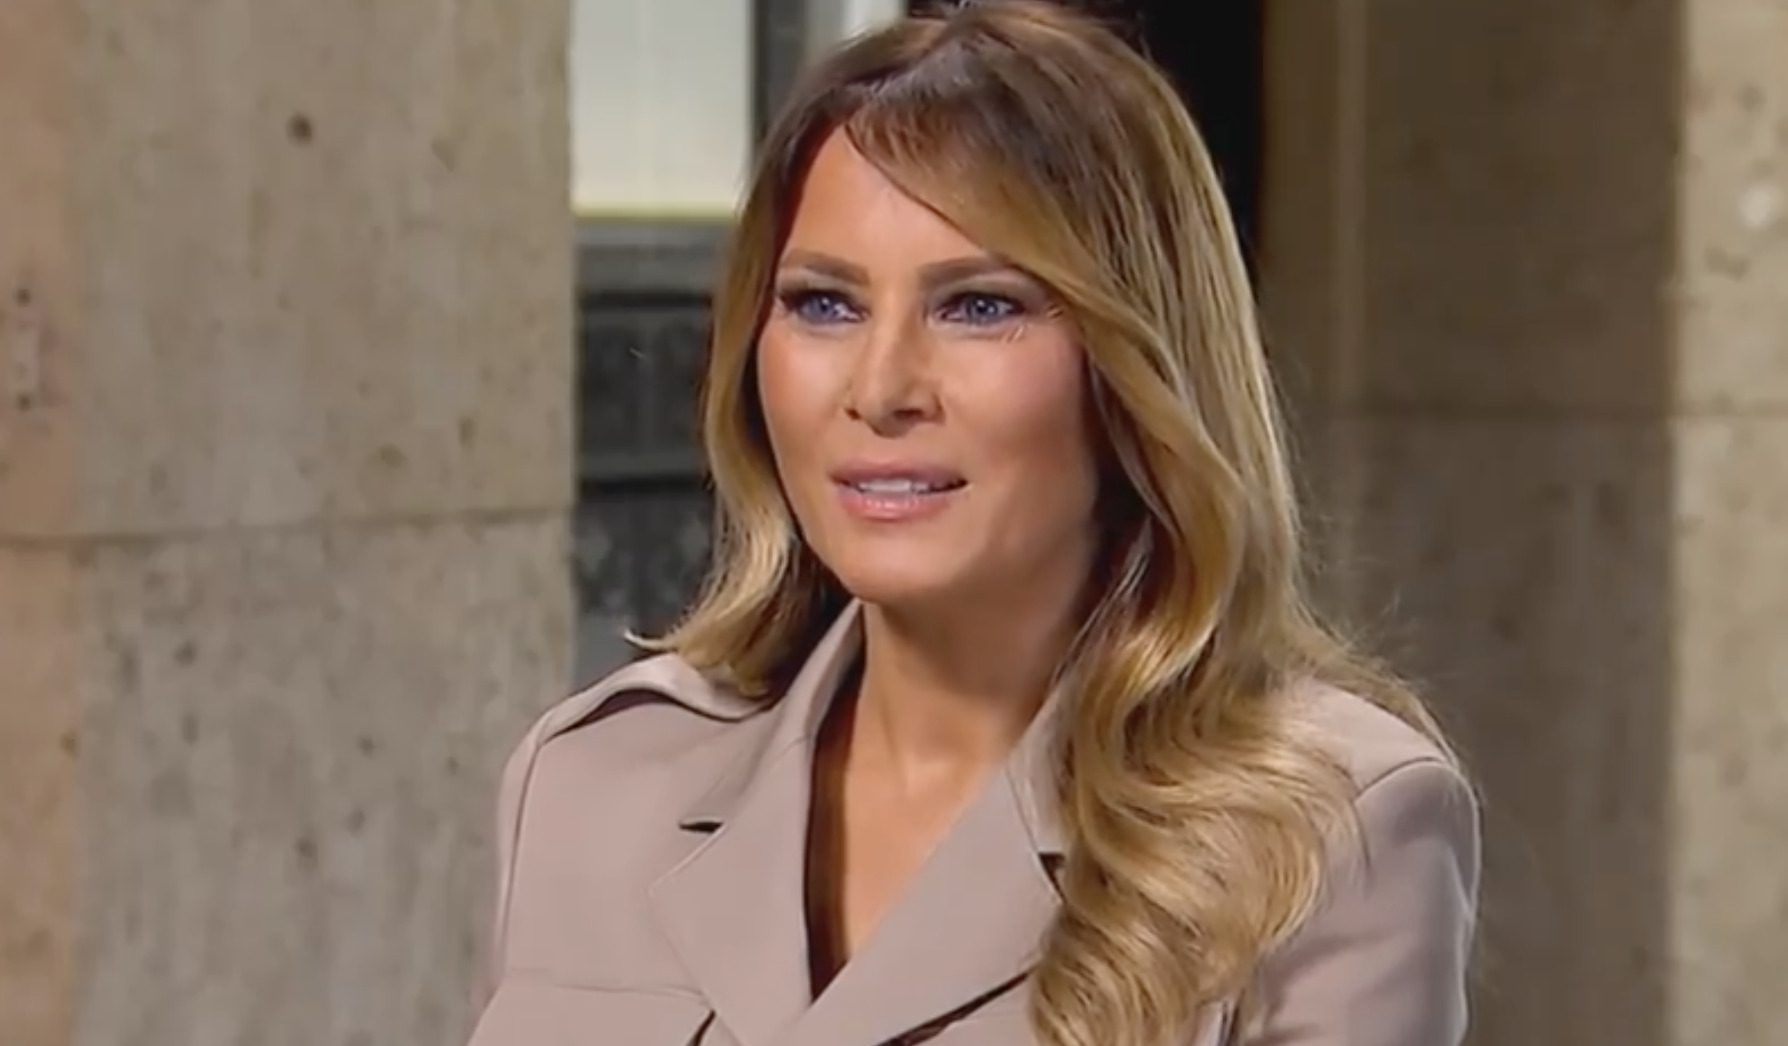 Melania Trump Has Become Donald’s ‘Secret Weapon’ During ‘Hellish’ Time: Report